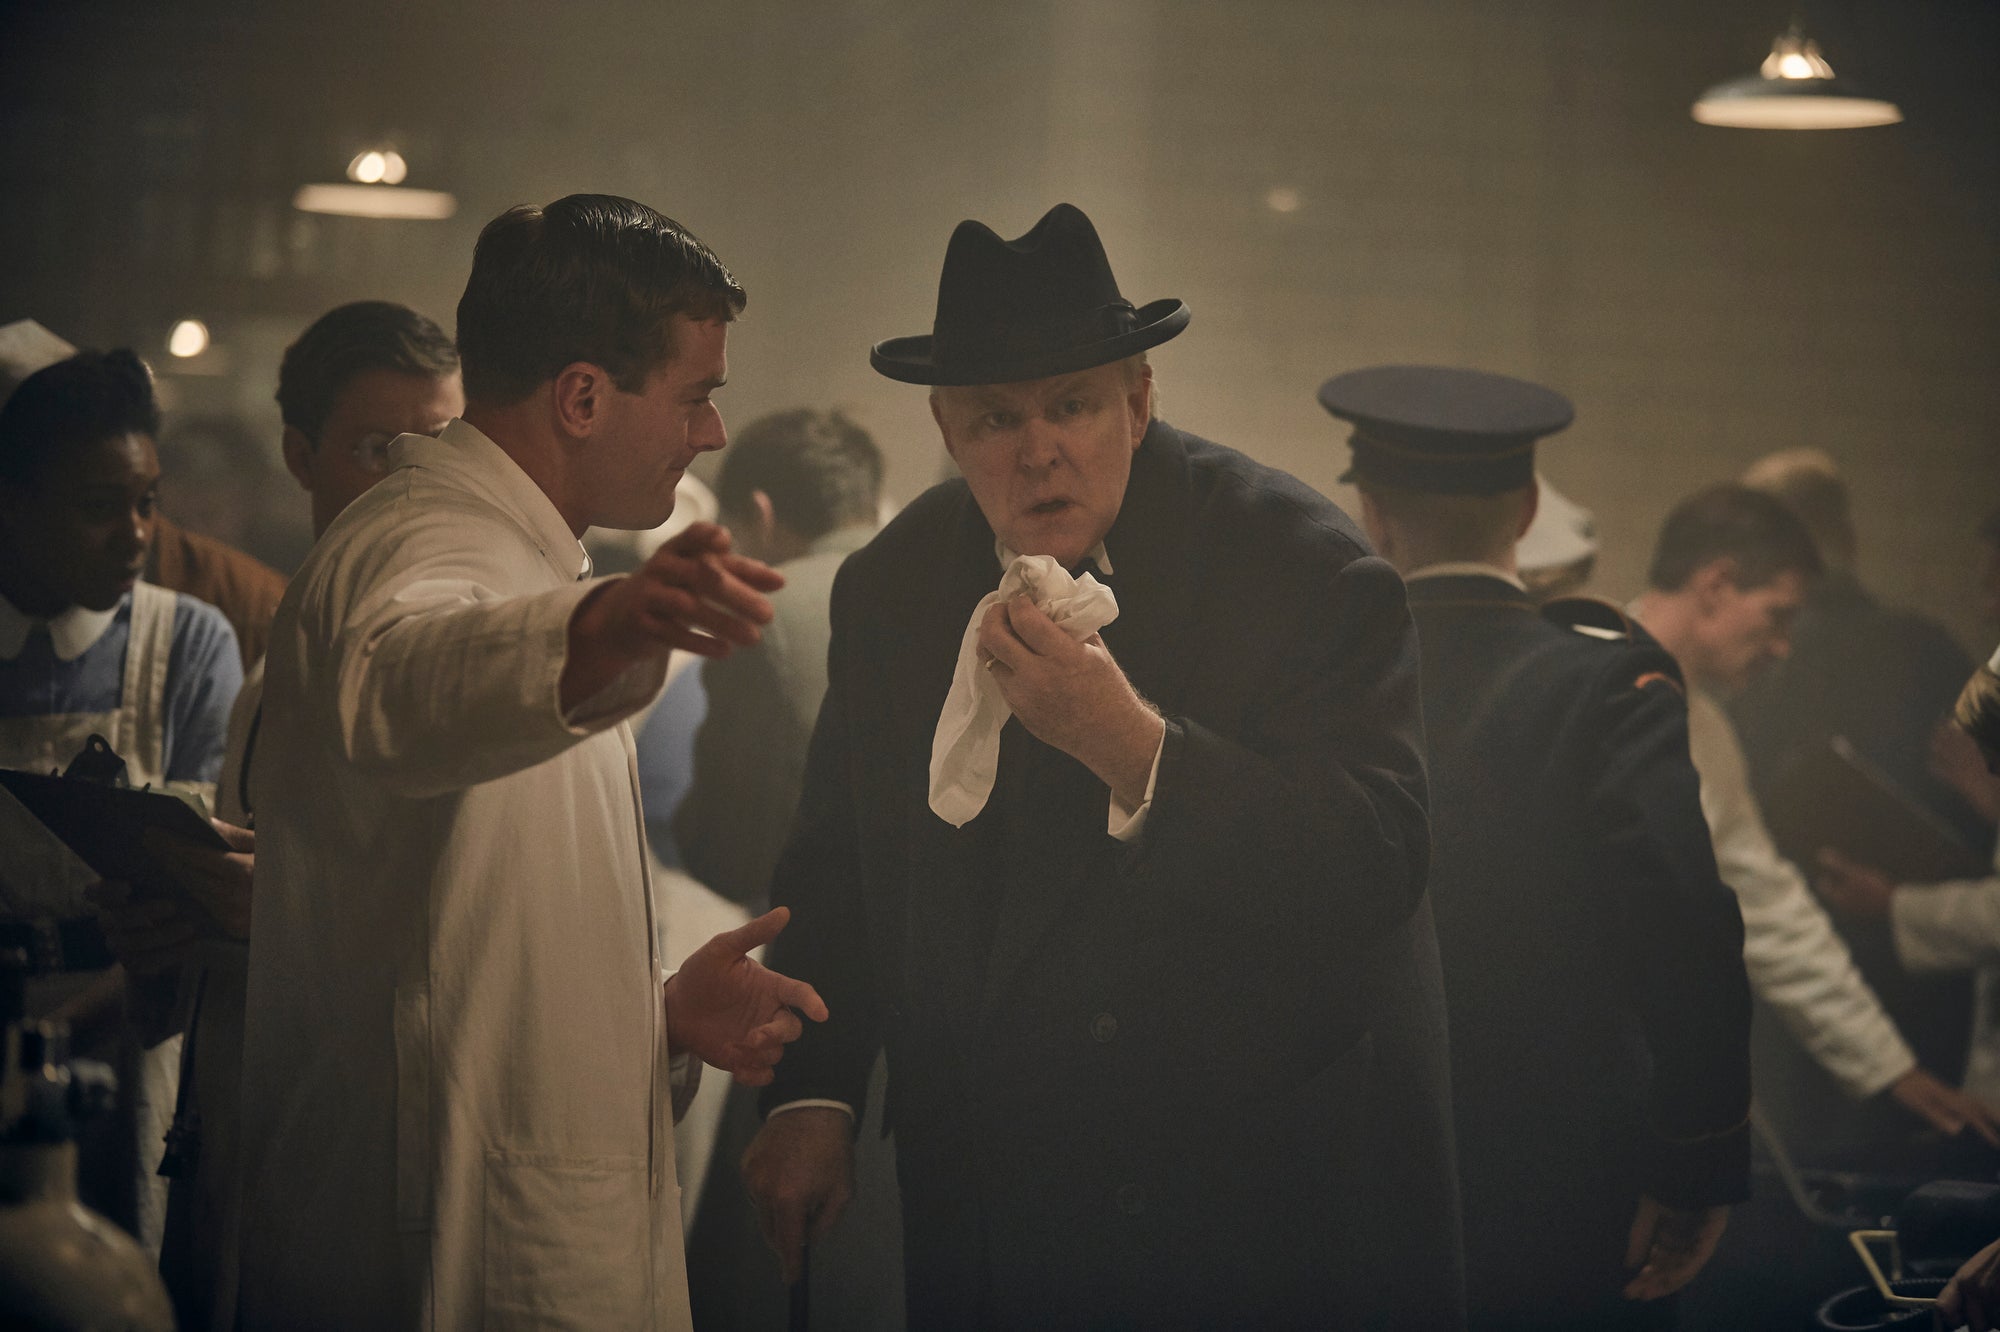 John Lithgow, center, plays Winston Churchill in the series "The Crown."